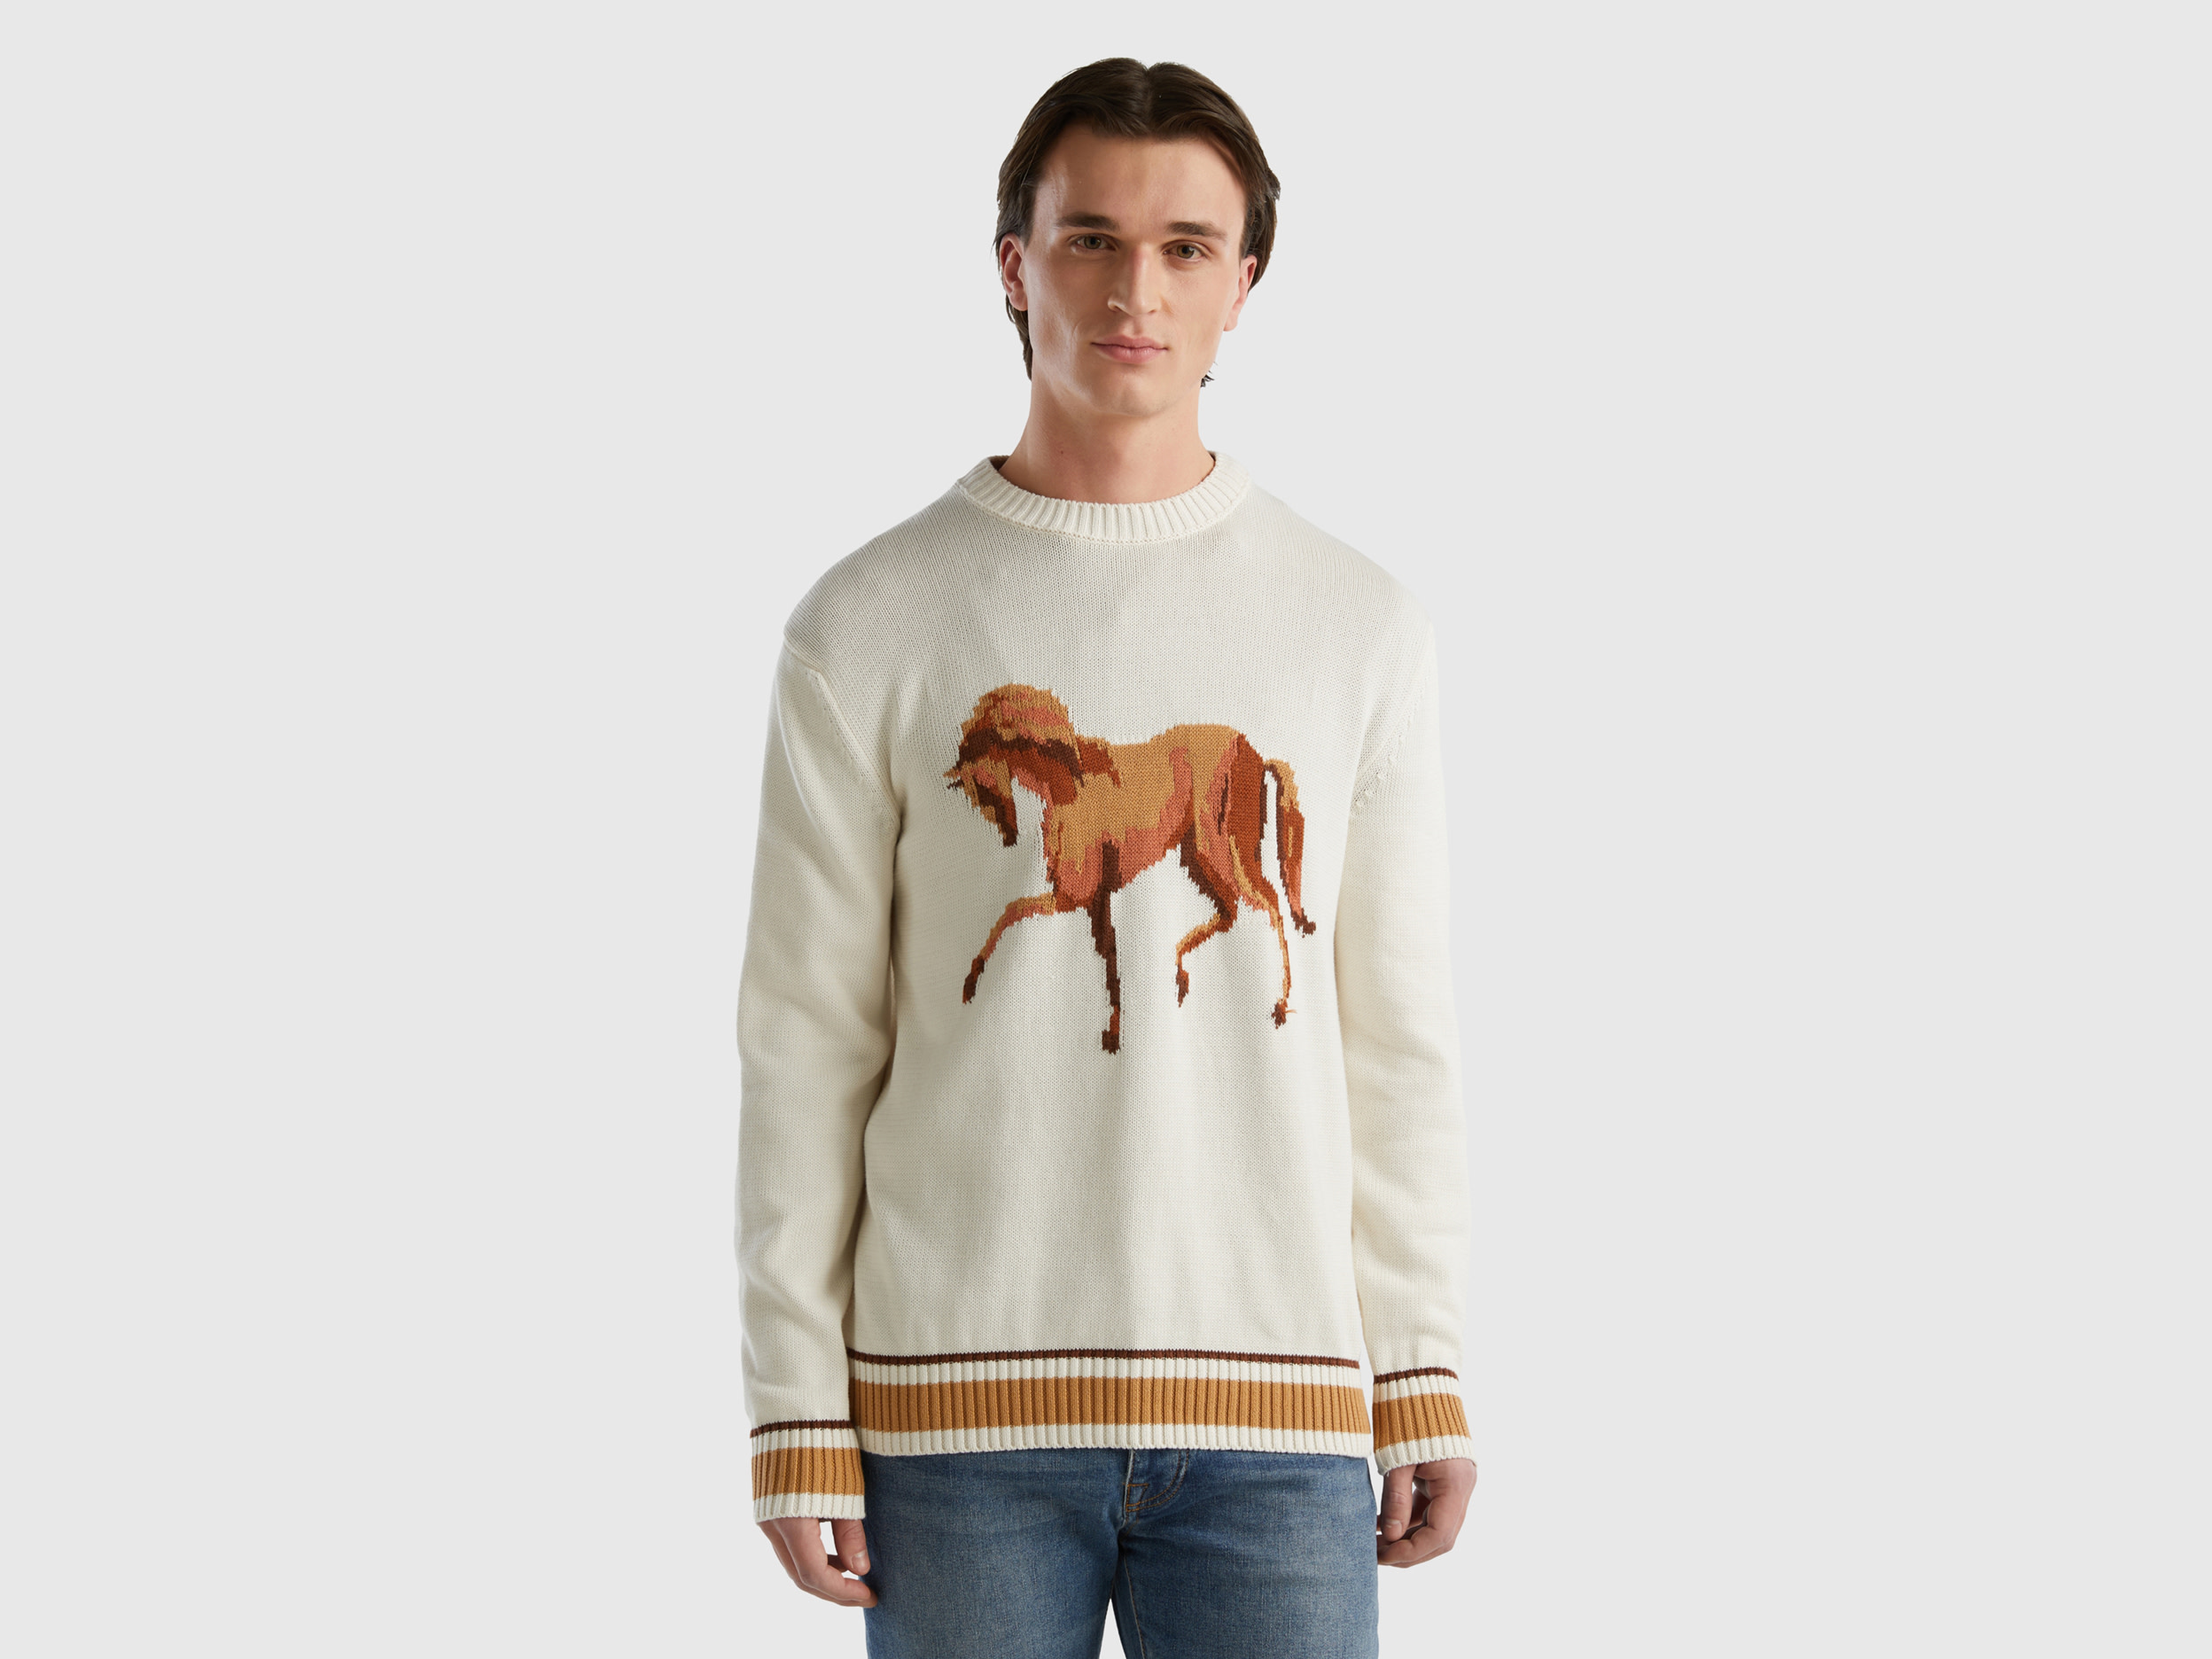 Benetton, Sweater With Horse Inlay, size L, Creamy White, Men